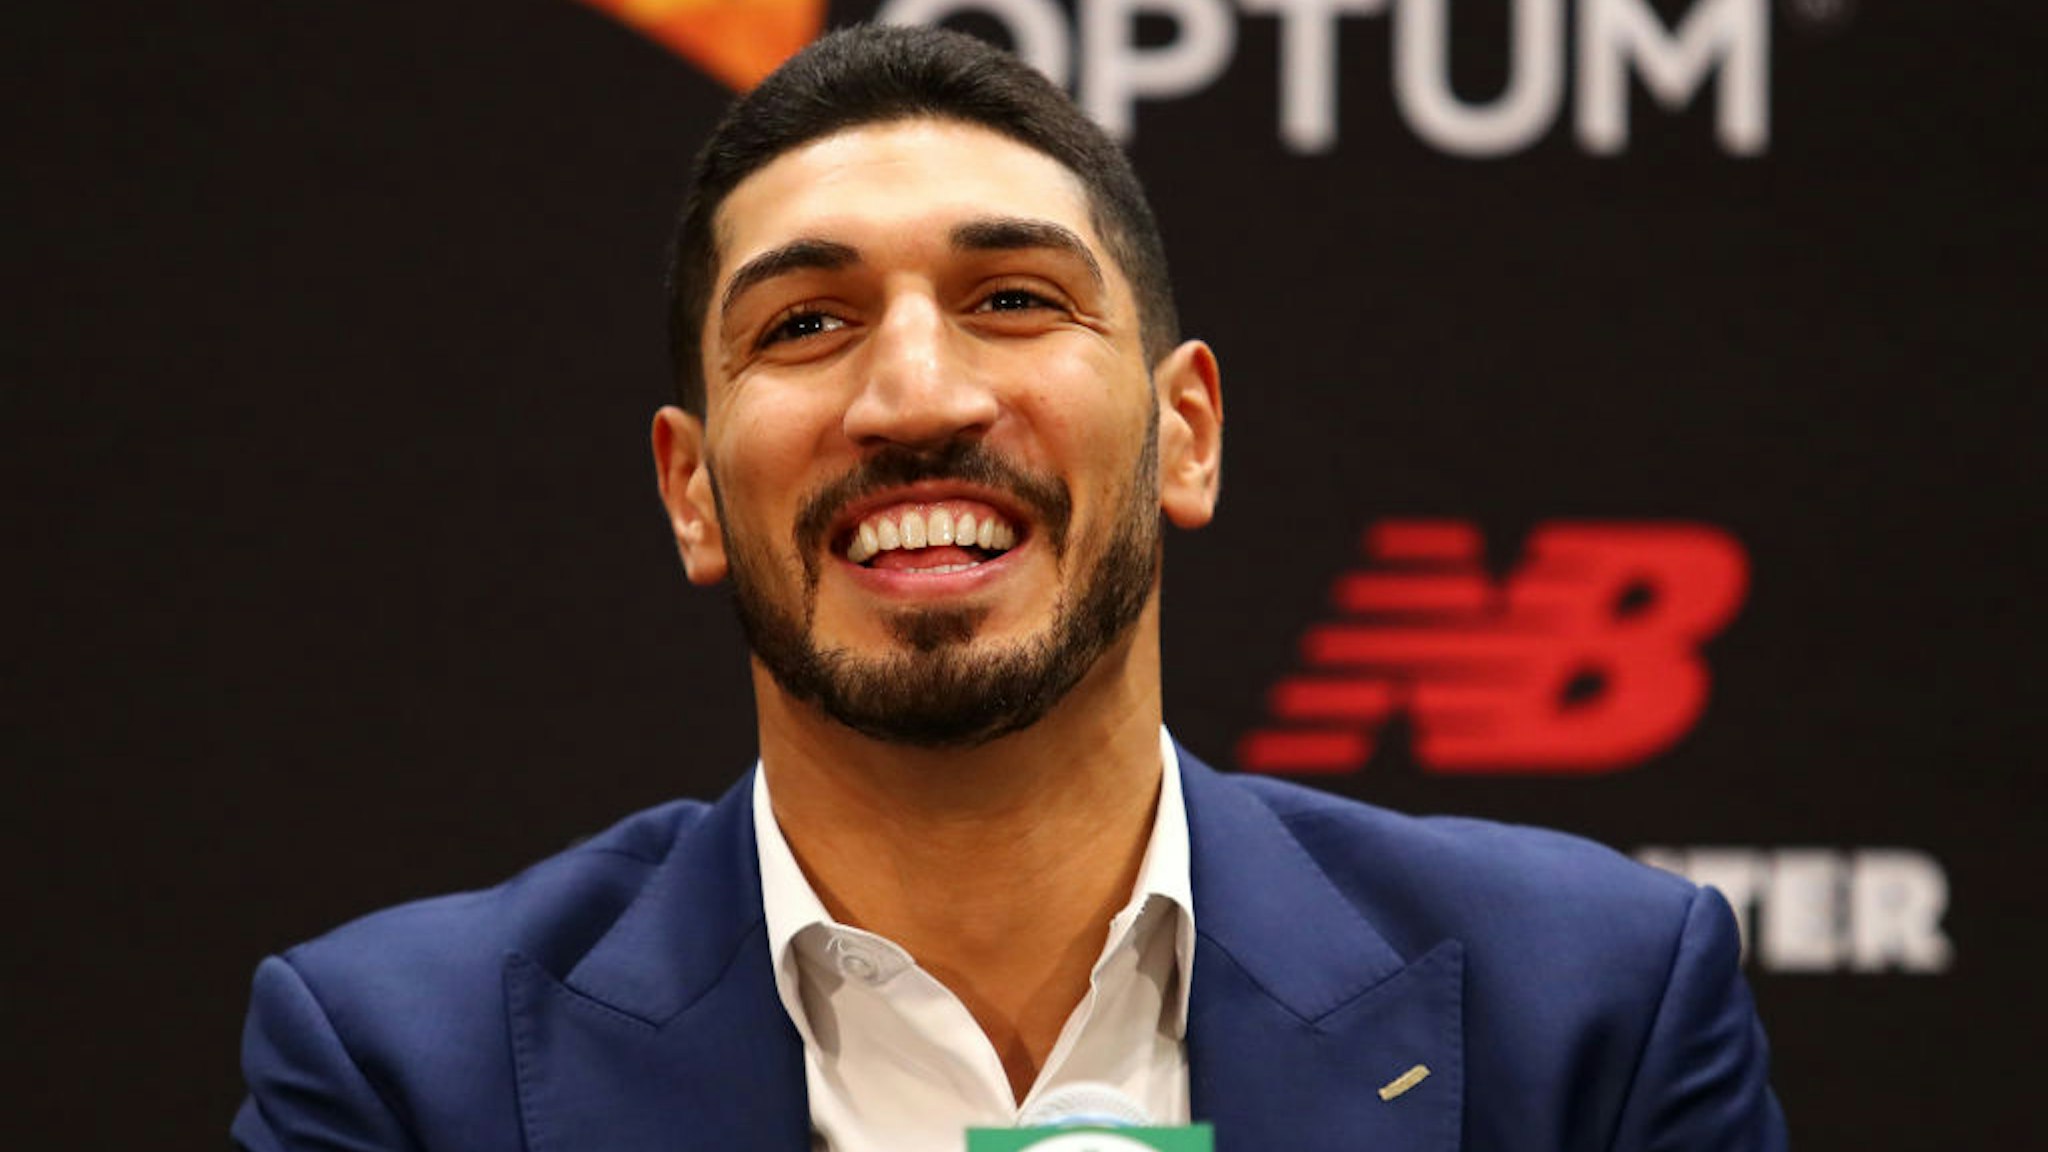 Enes Kanter reacts during a press conference as he is introduced as a member of the Boston Celtics at the Auerbach Center at New Balance World Headquarters on July 17, 2019 in Boston, Massachusetts.